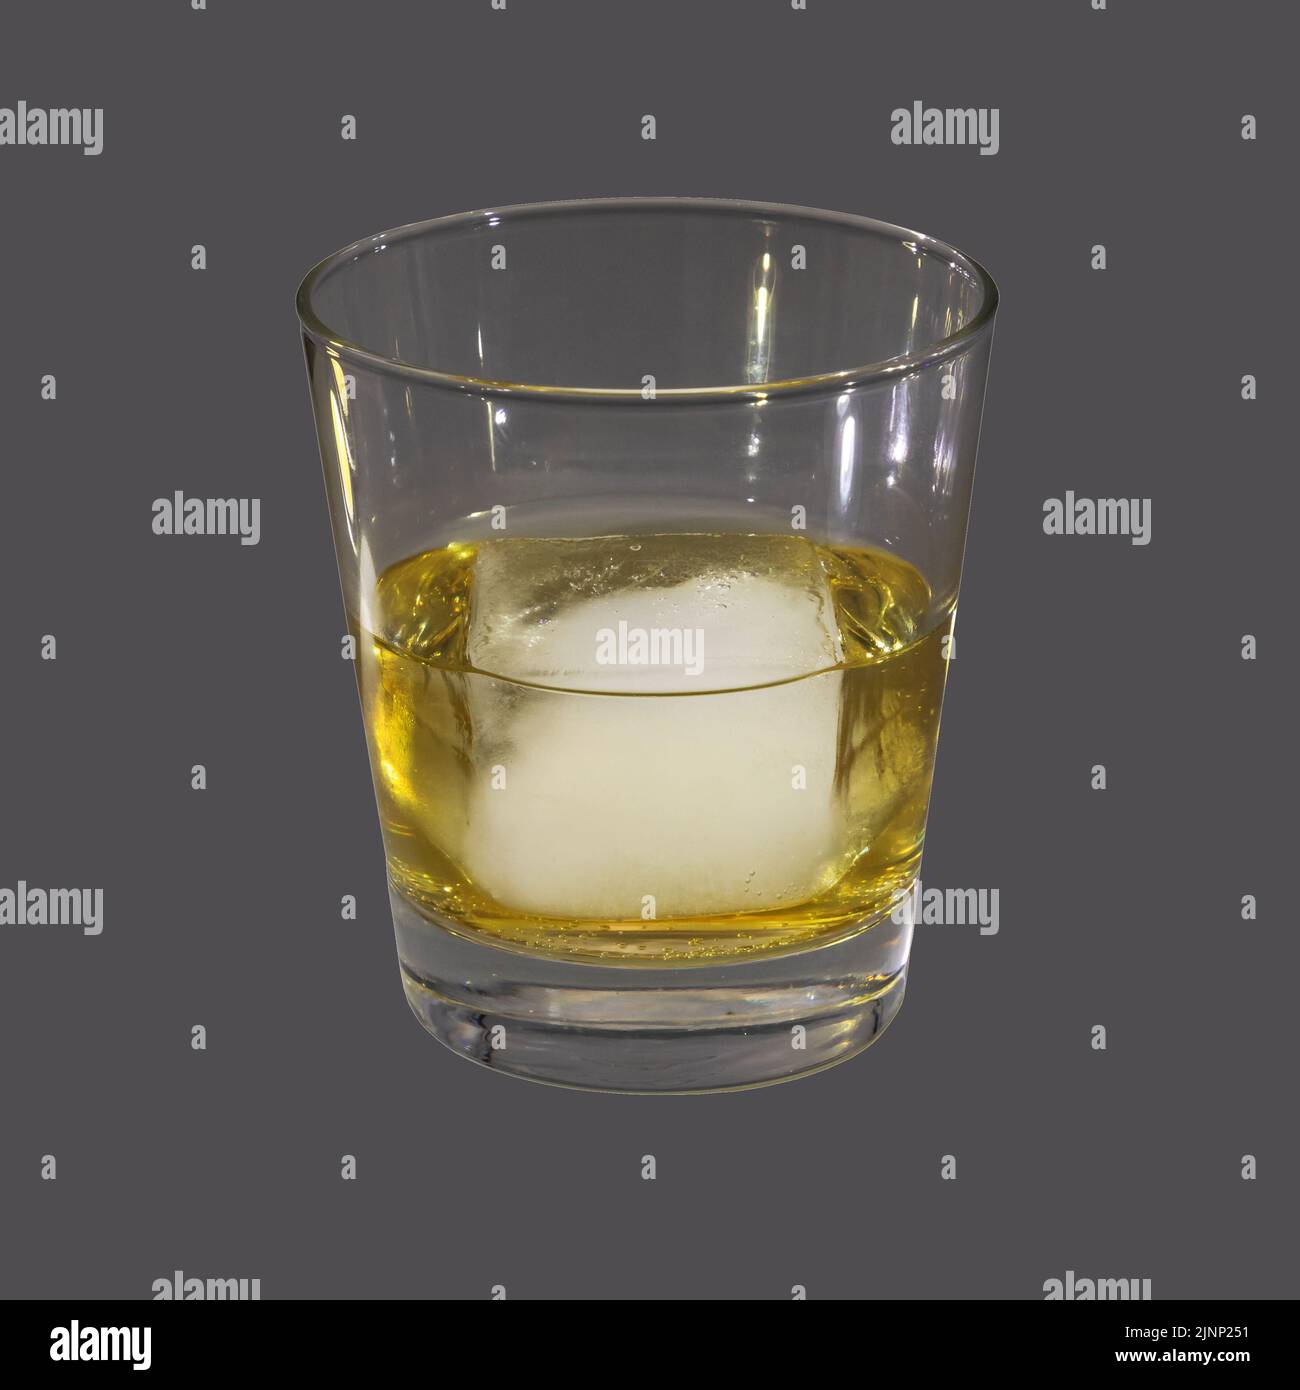 https://c8.alamy.com/comp/2JNP251/studio-photograph-of-a-glass-with-an-ice-cube-on-grey-background-2JNP251.jpg